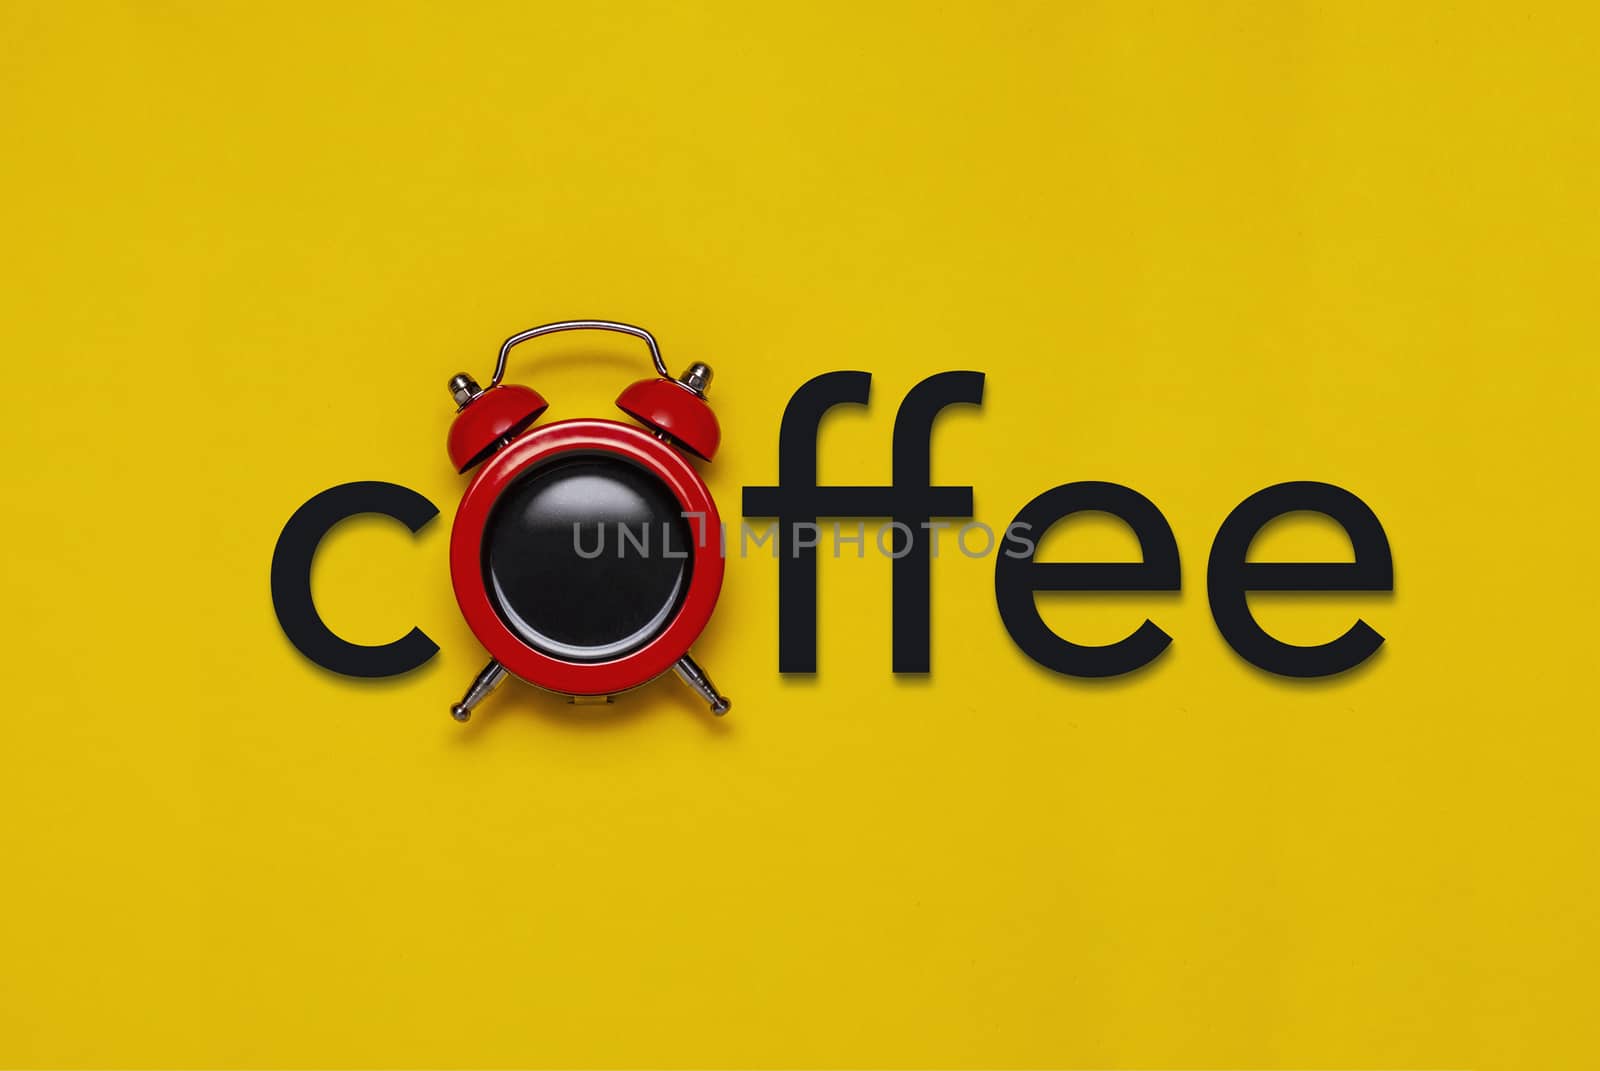 Coffee concept with alarm clock and text over a colourful yellow background conceptual of a countdown to a coffee break